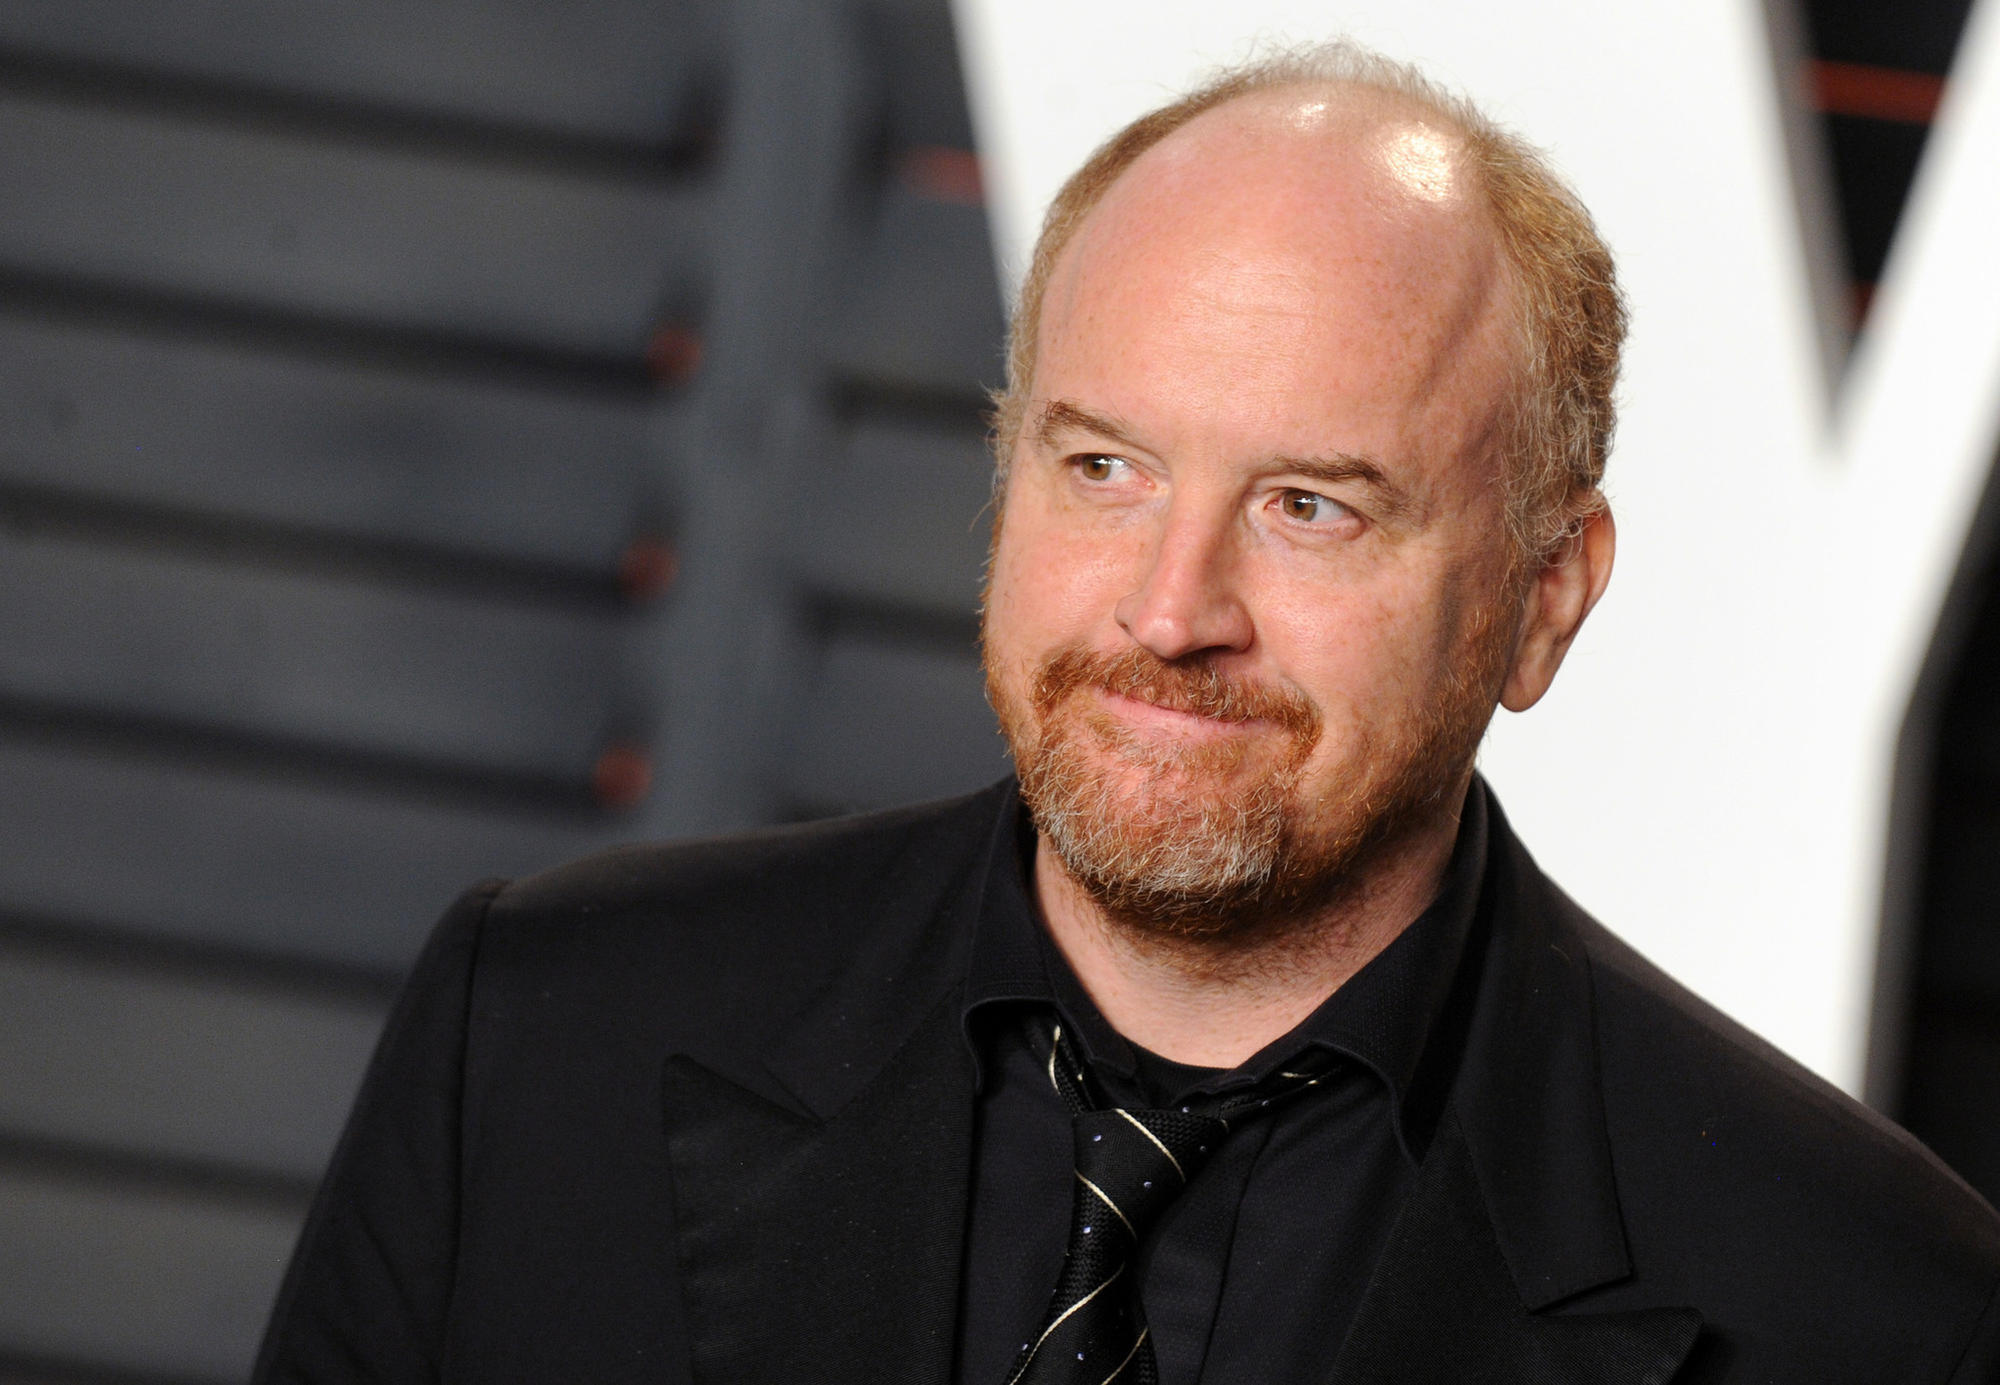 Louis C.K. says he misused his power and &#39;brought pain&#39; - Chicago Tribune